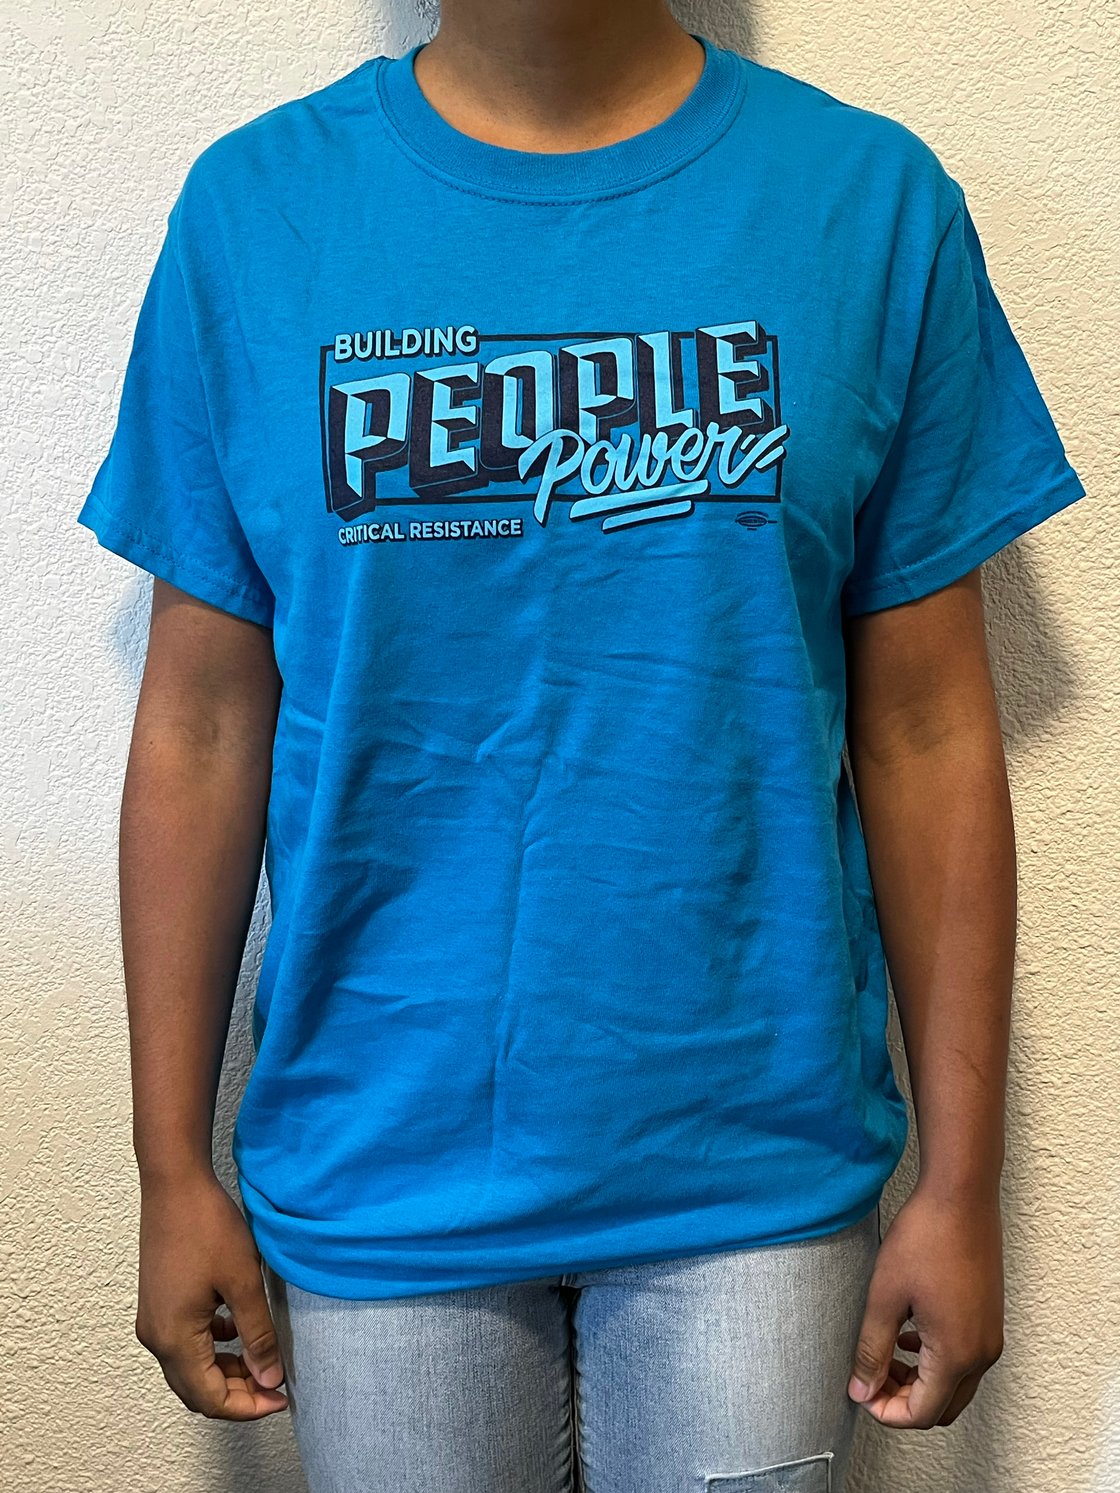 Image of Building People Power T-Shirt